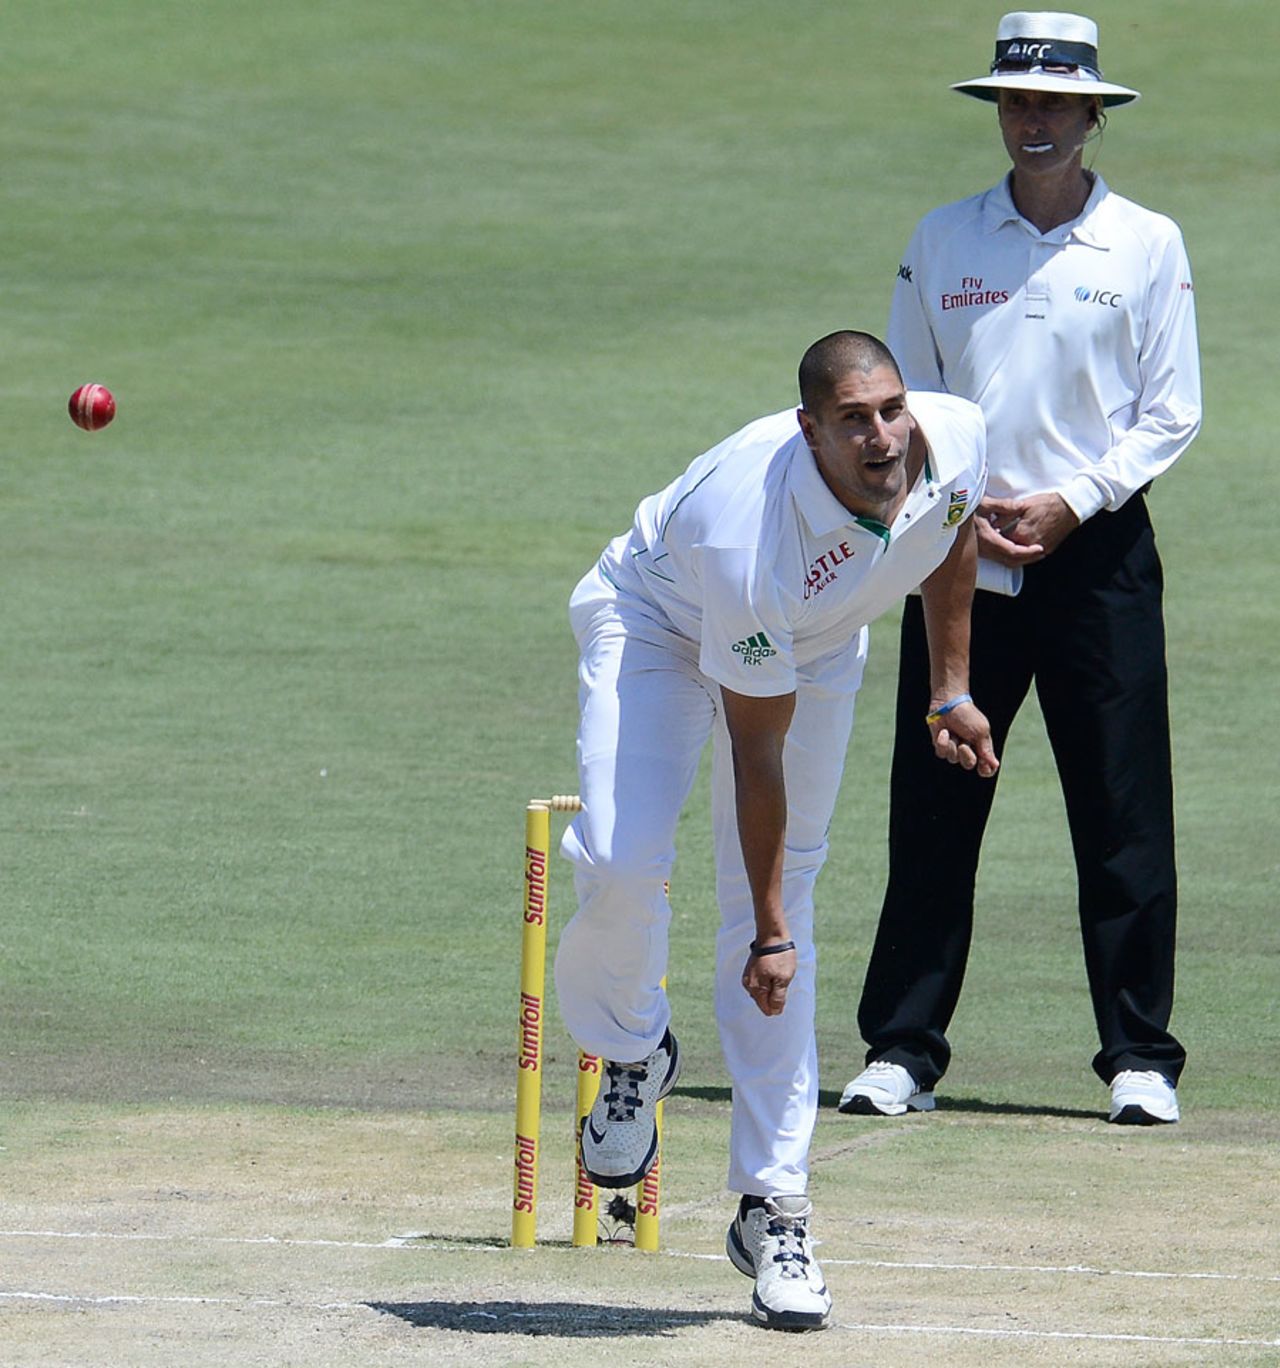 Rory Kleinveldt in his delivery stride, South Africa v Pakistan, 3rd Test, Centurion, 2nd day, February 23, 2013